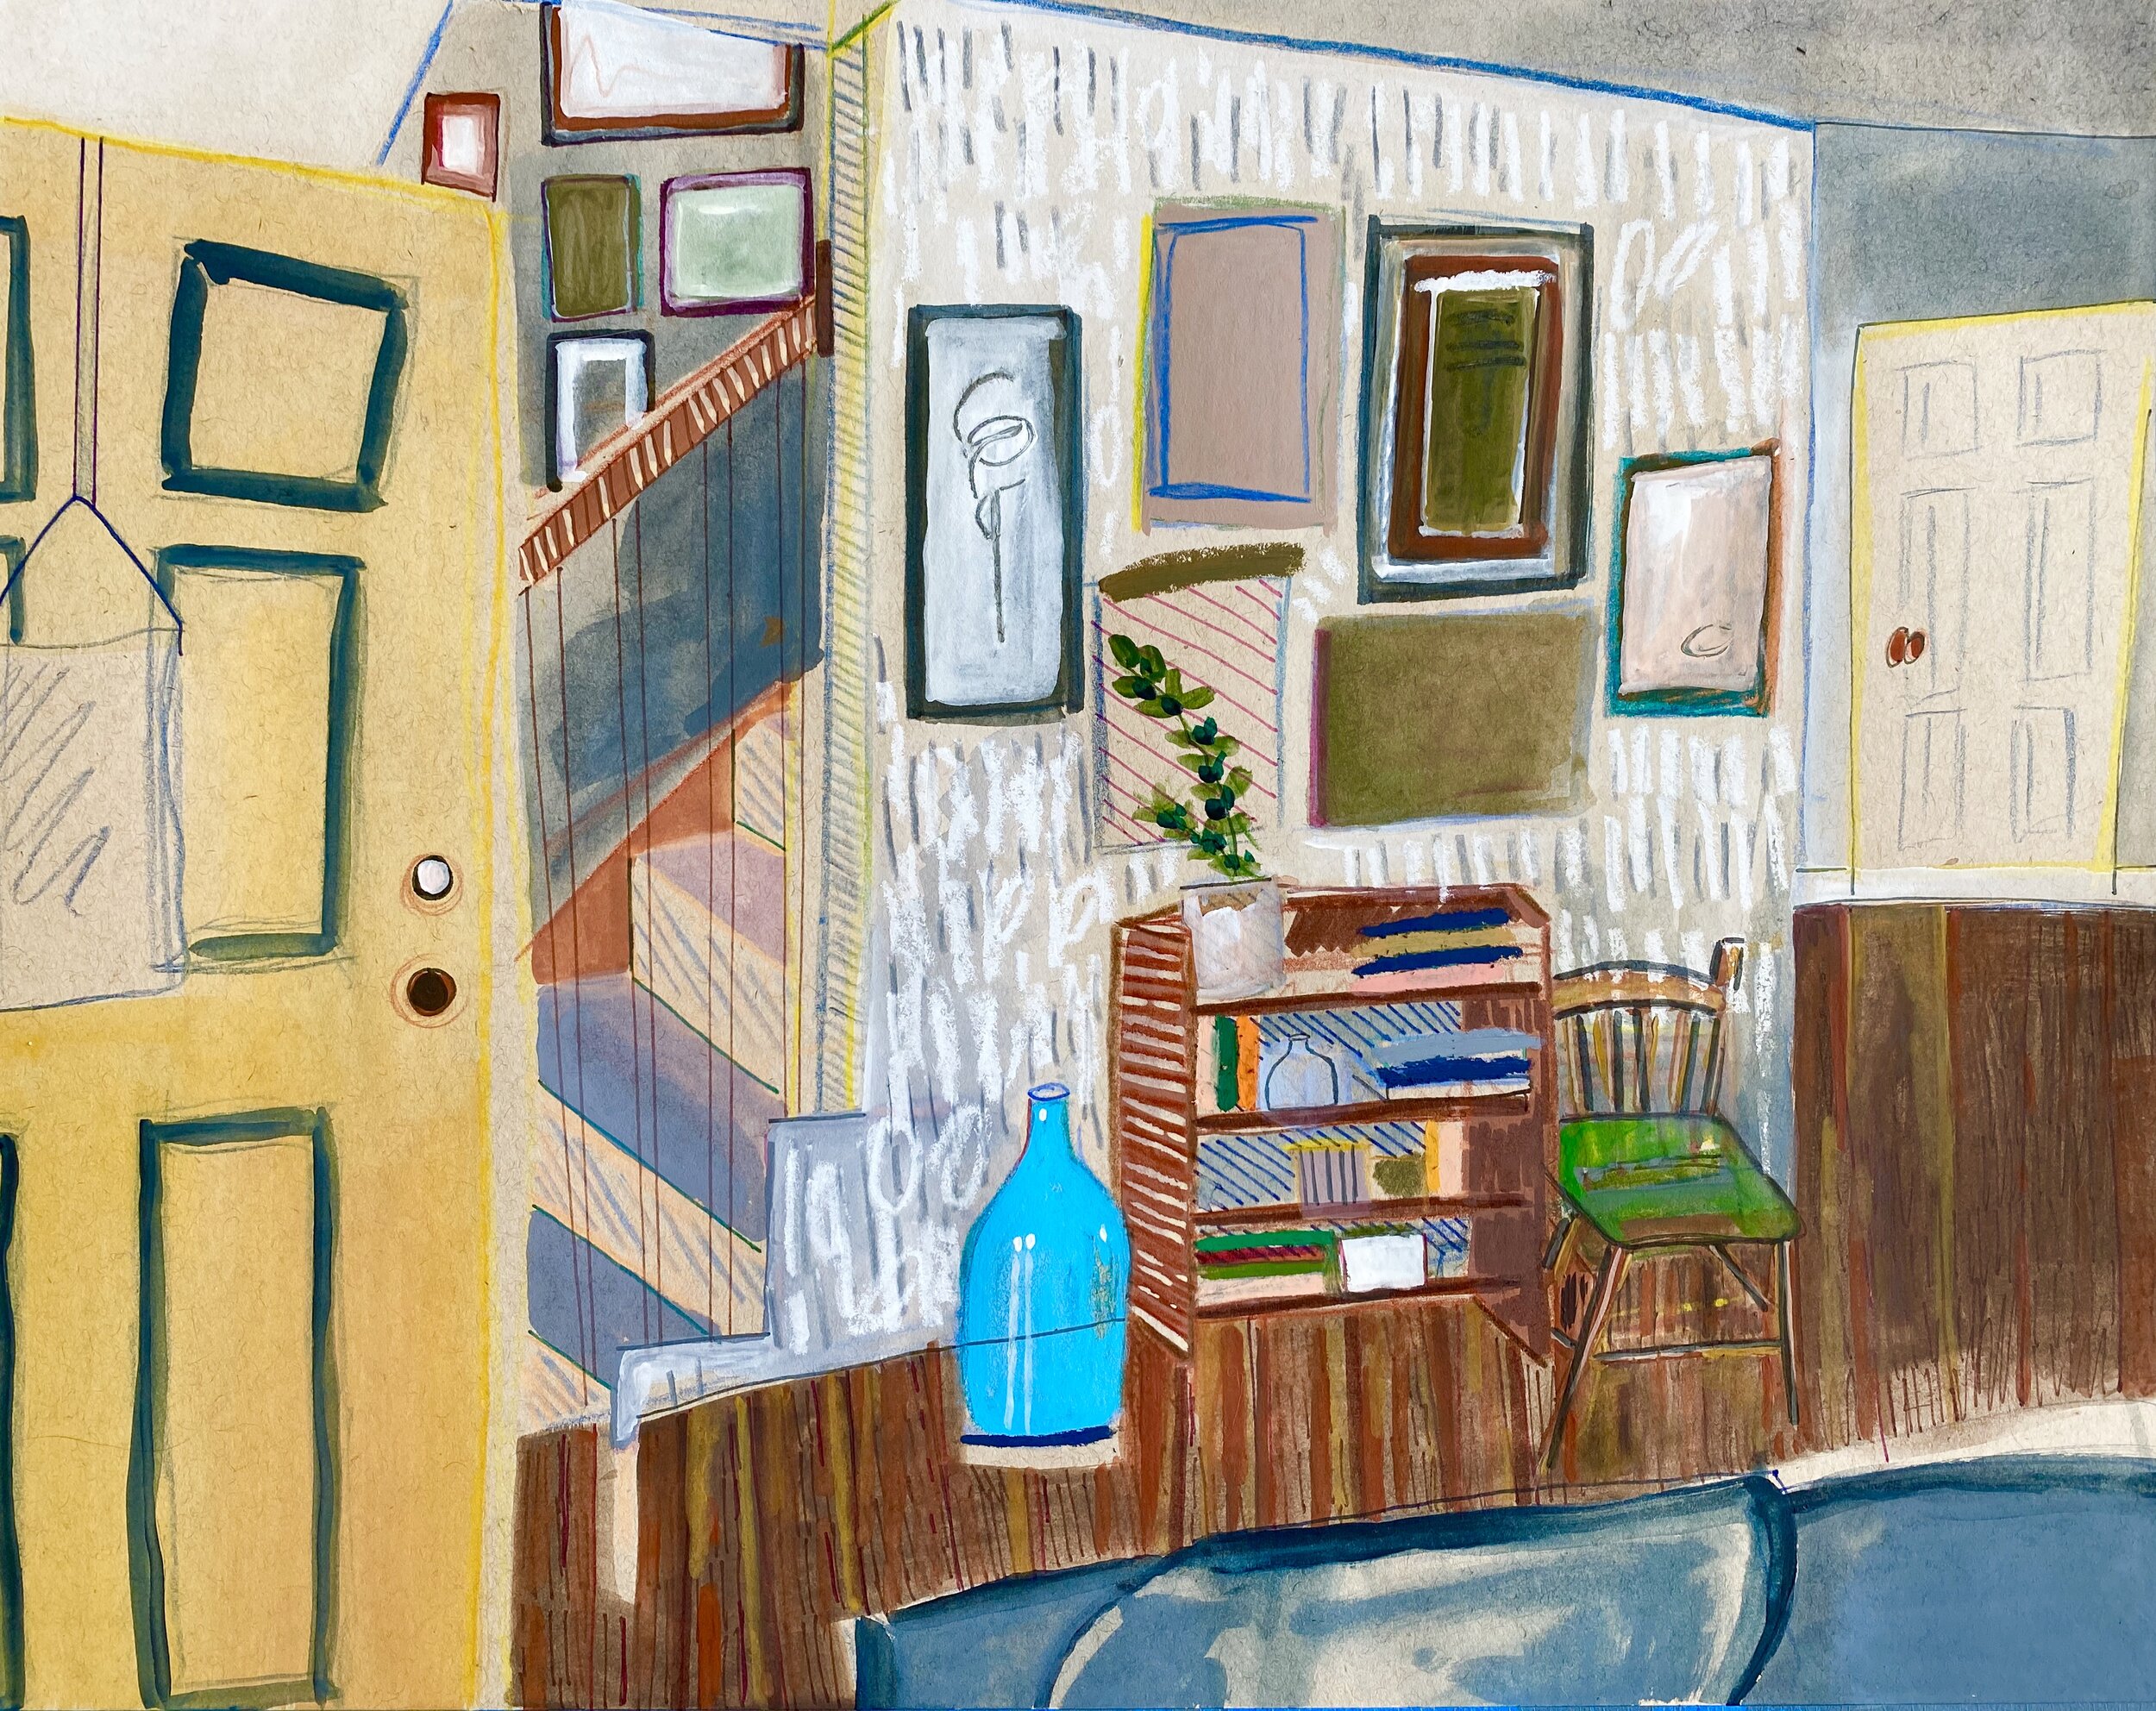   Quarantine Views , 2020. 11 x 14 in. Gouache and Pastel on Paper.  